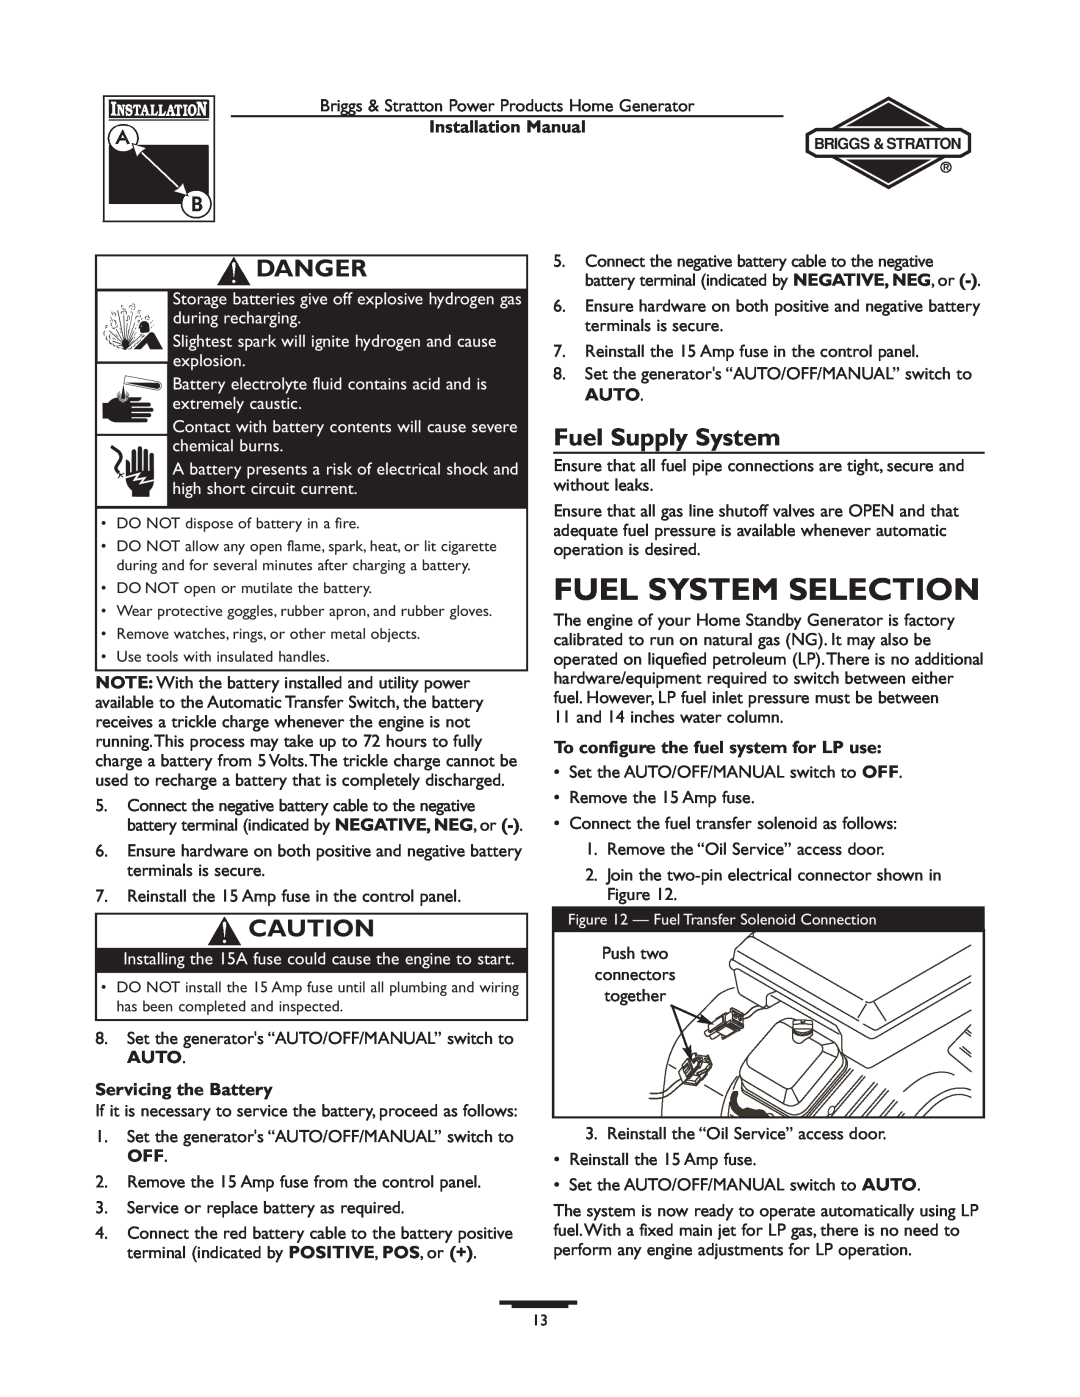 Briggs & Stratton 01815-0 Fuel System Selection, Danger, Fuel Supply System, Servicing the Battery, Installation Manual 